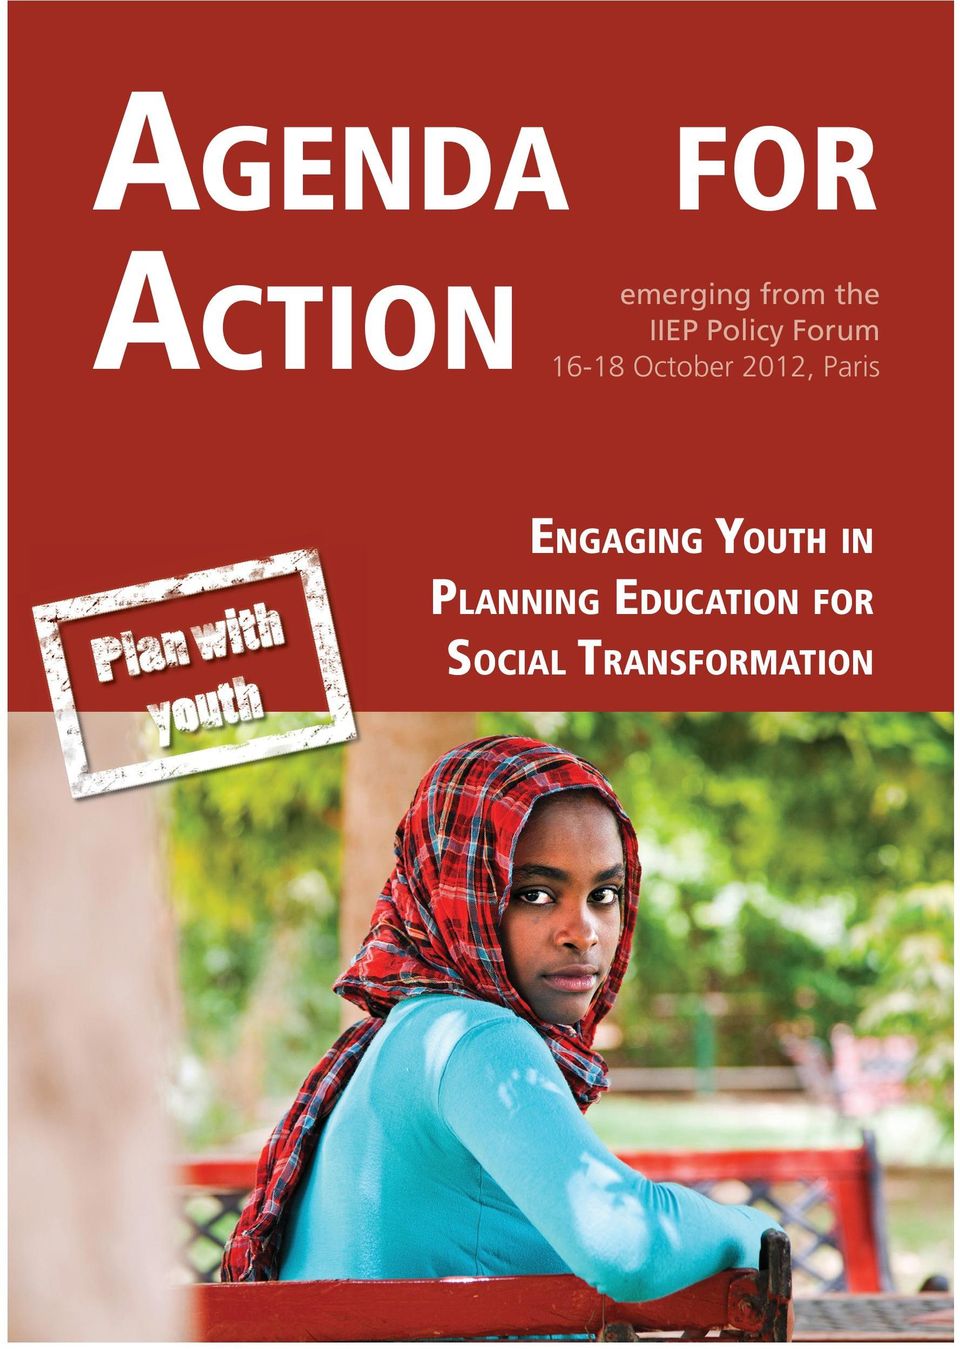 2012, Paris ENGAGING YOUTH IN